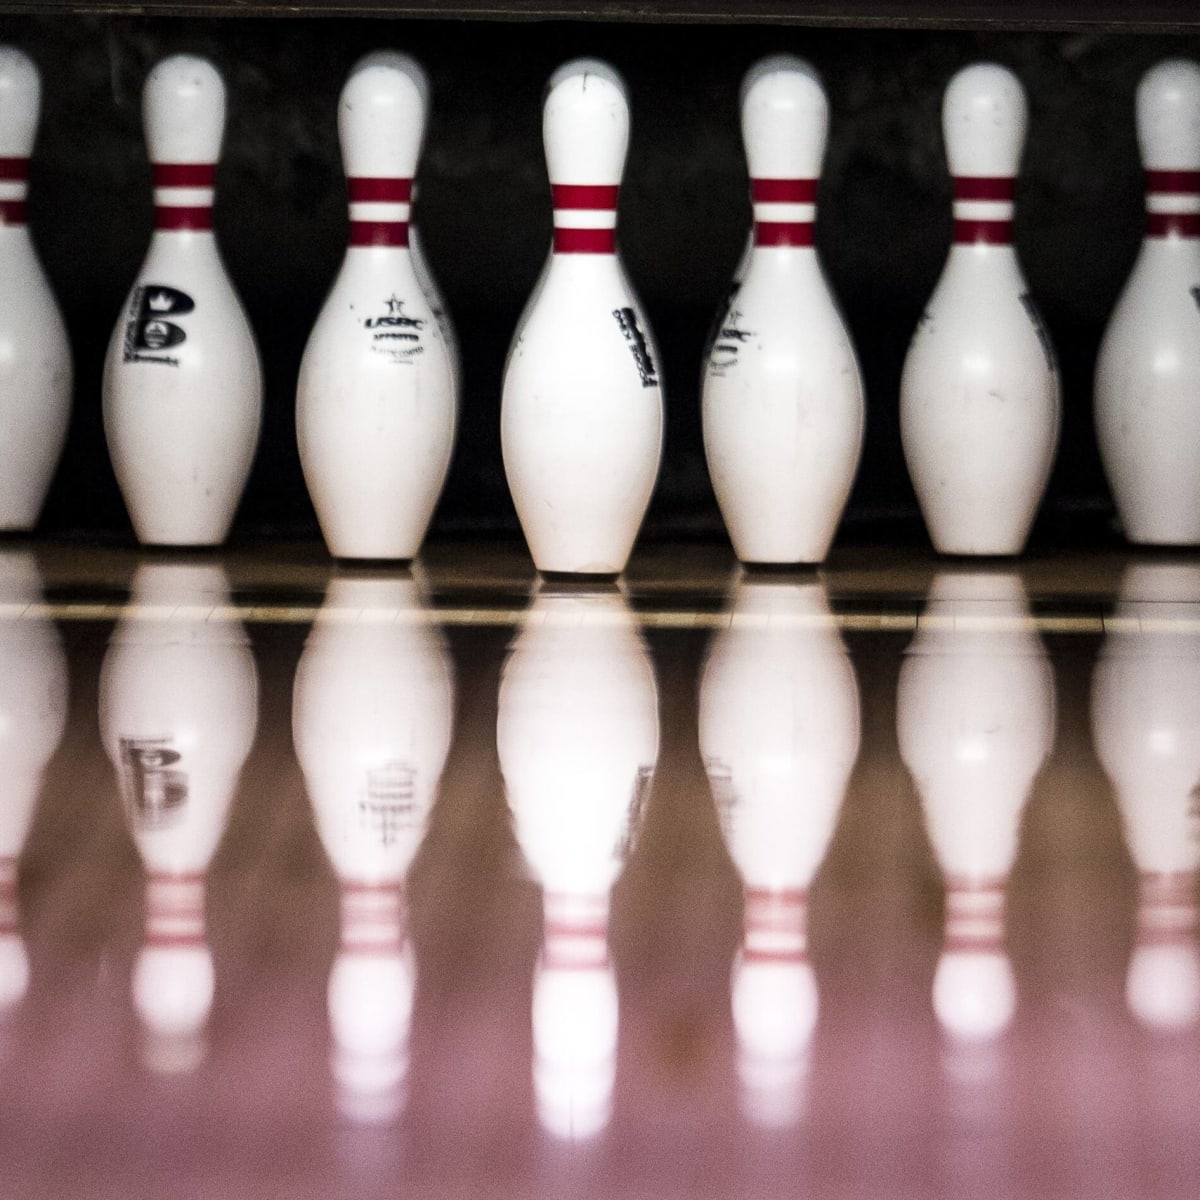 Watch 2023 Tour Finals Championship Stream PBA Live, TV Channel - How to Watch and Stream Major League and College Sports